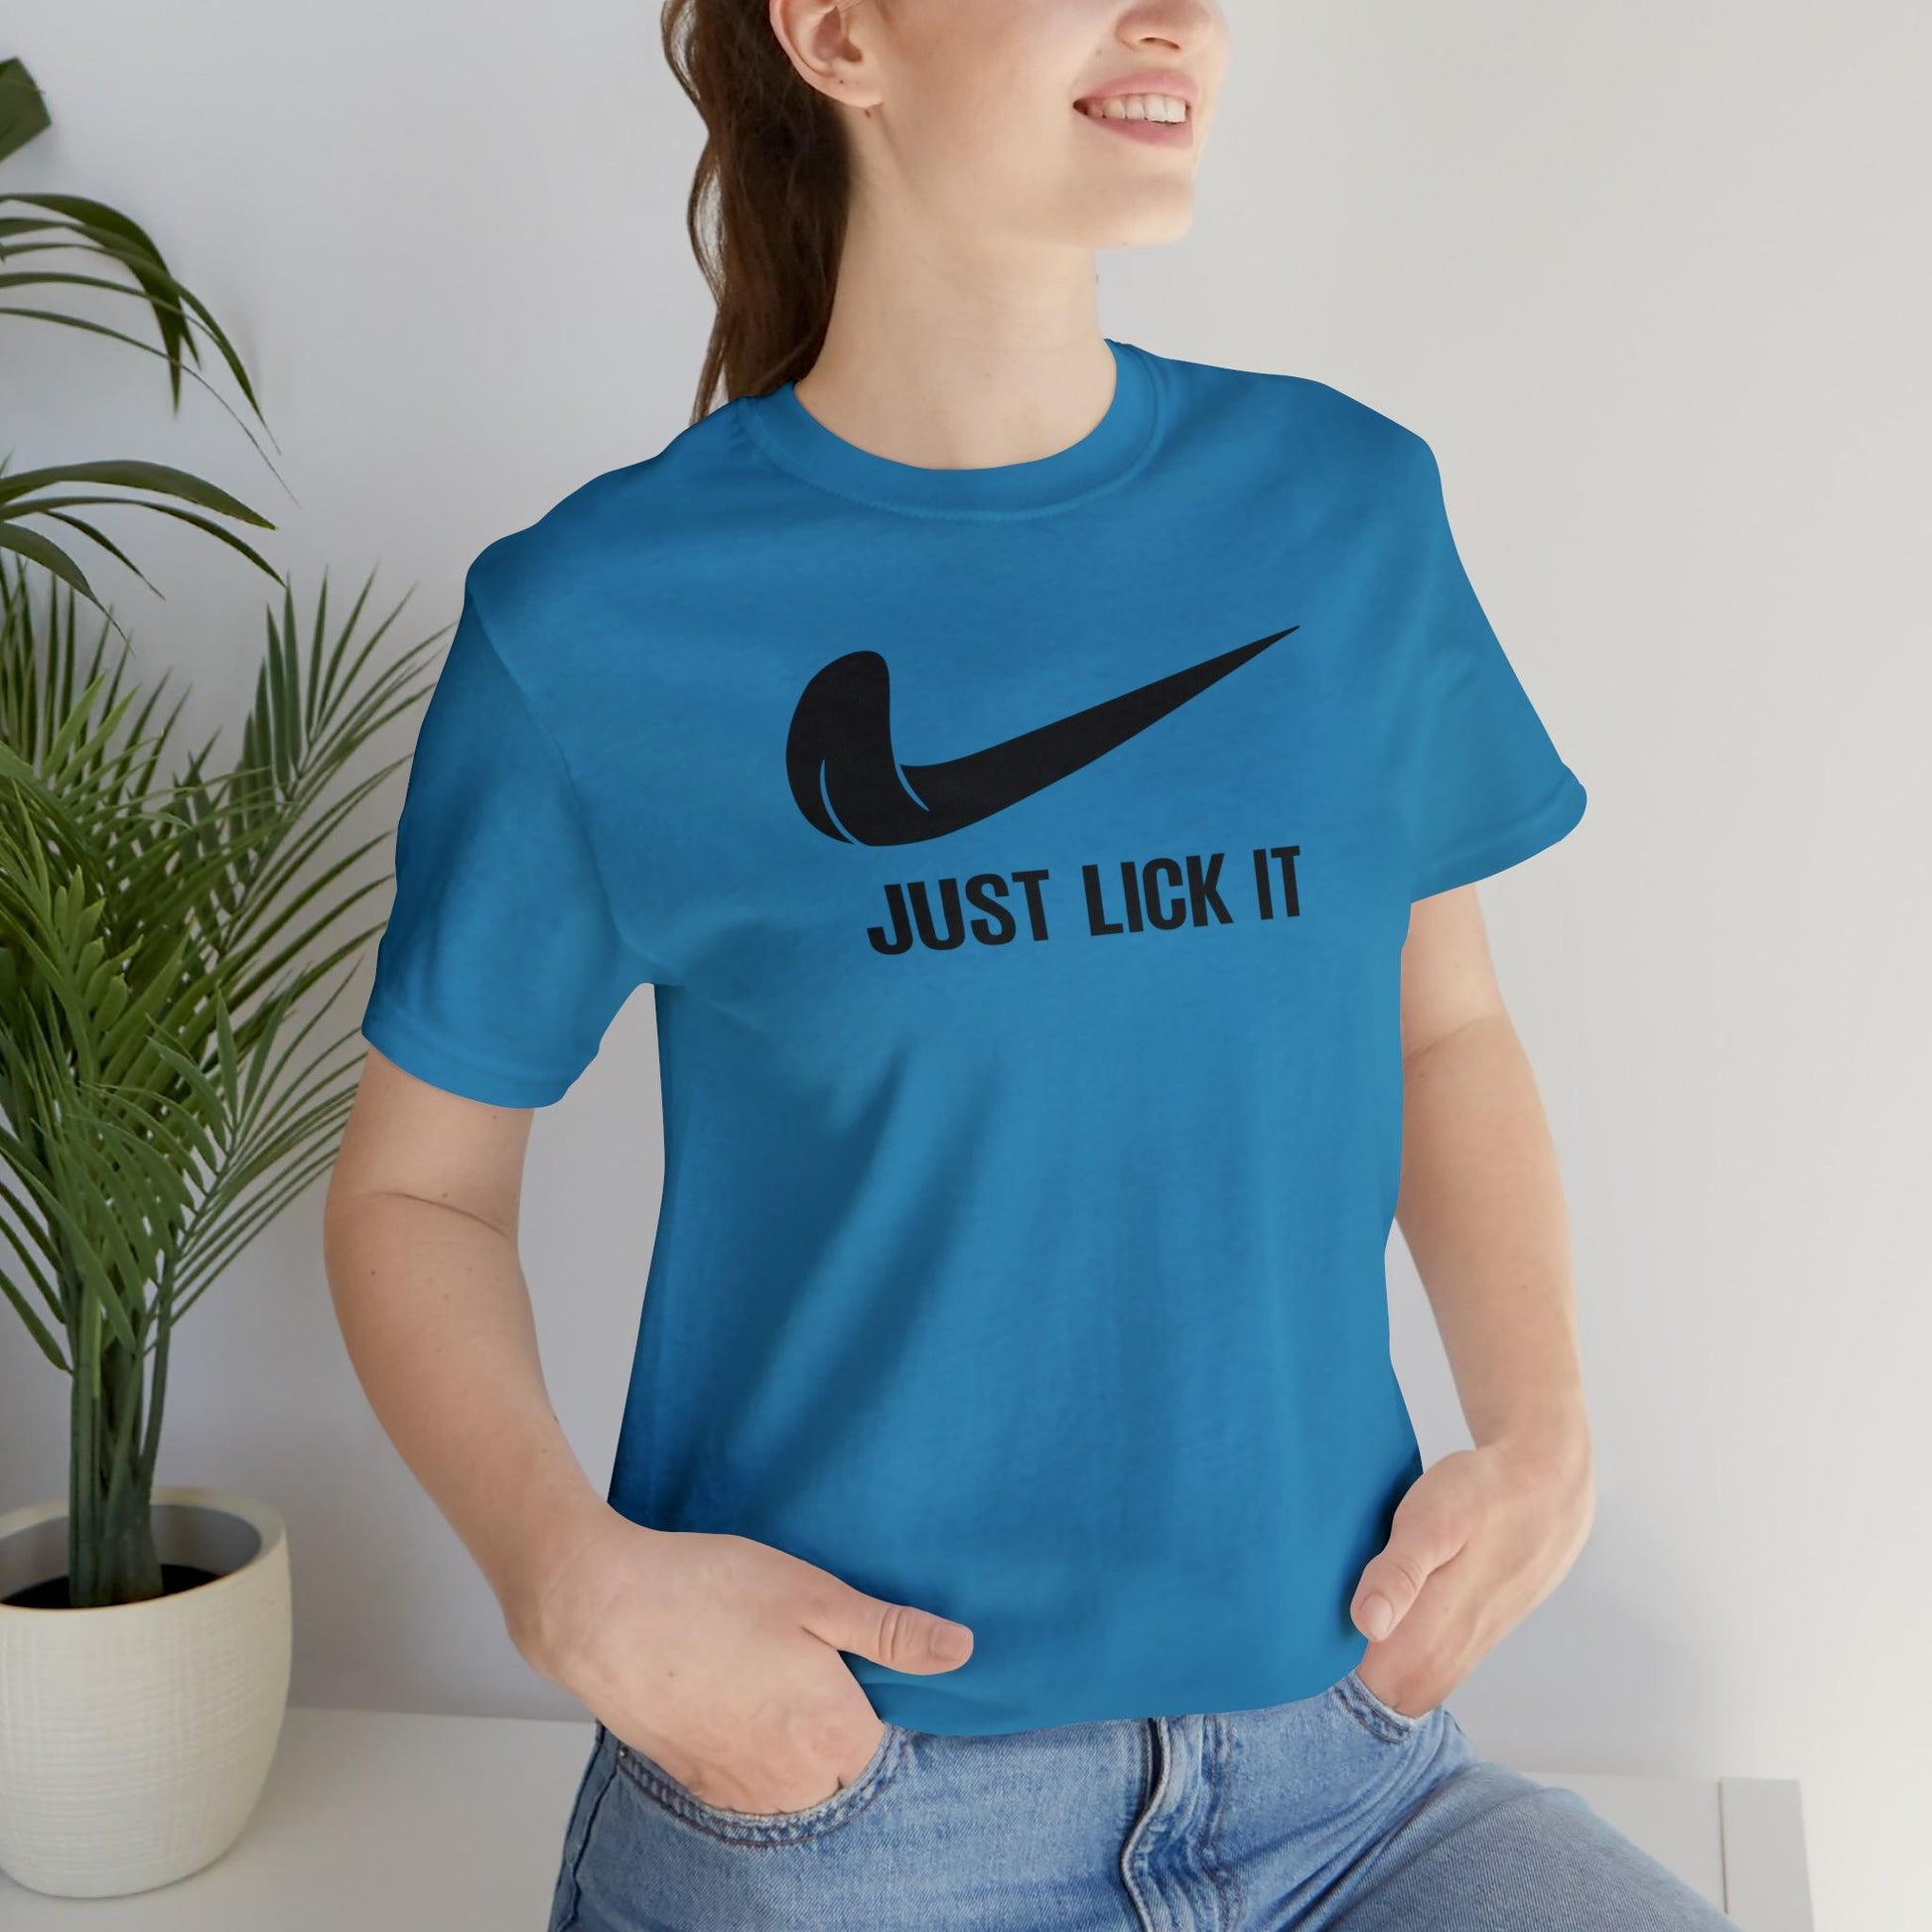 Just Lick It - Wicked Naughty Apparel